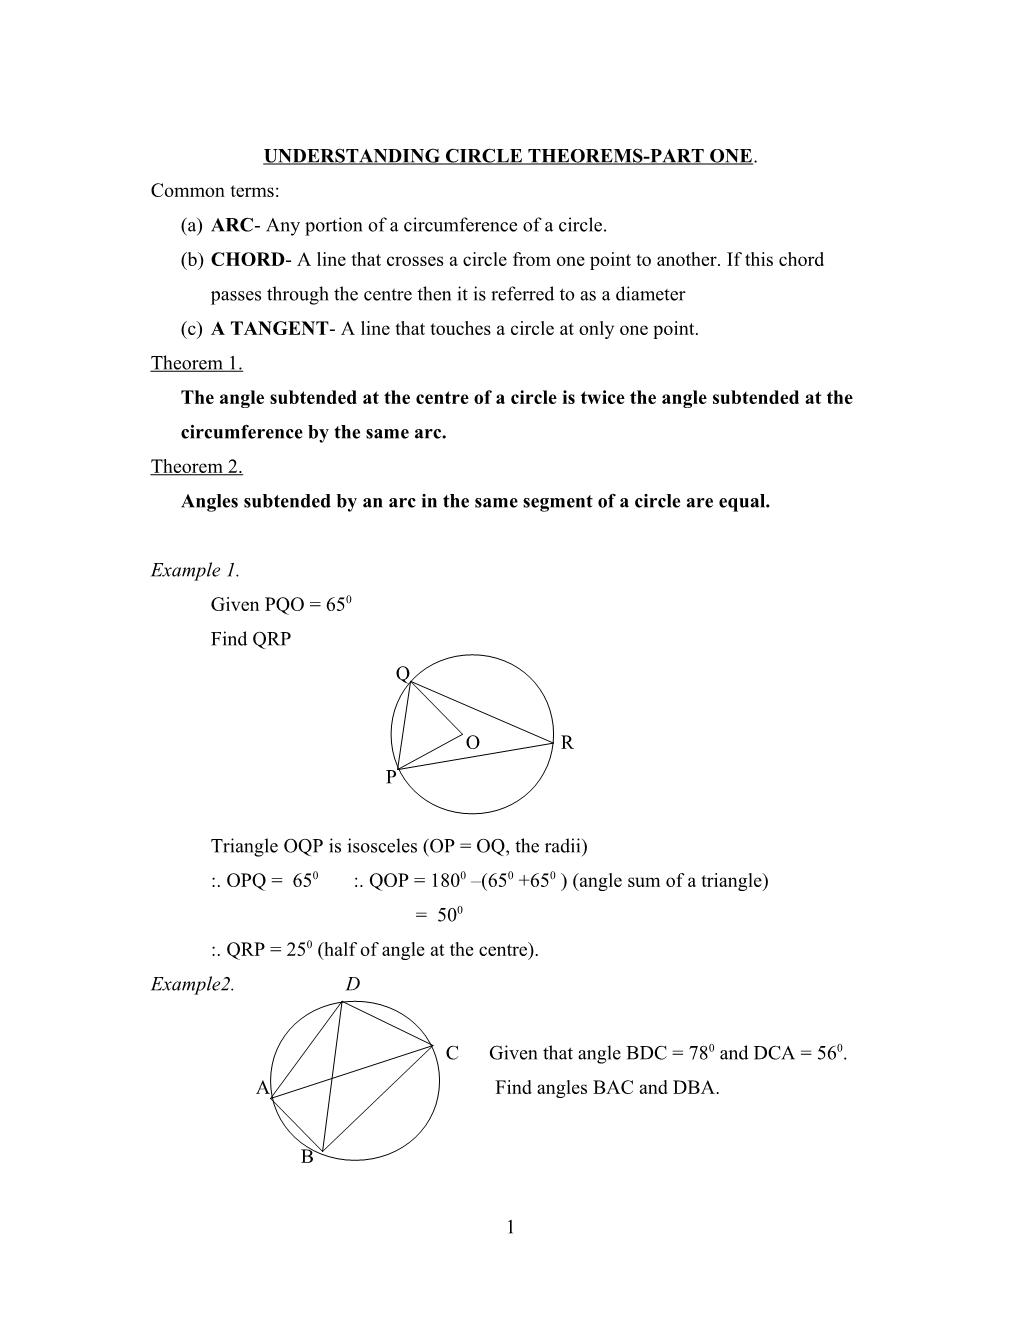 Understanding Circle Theorems-Part One